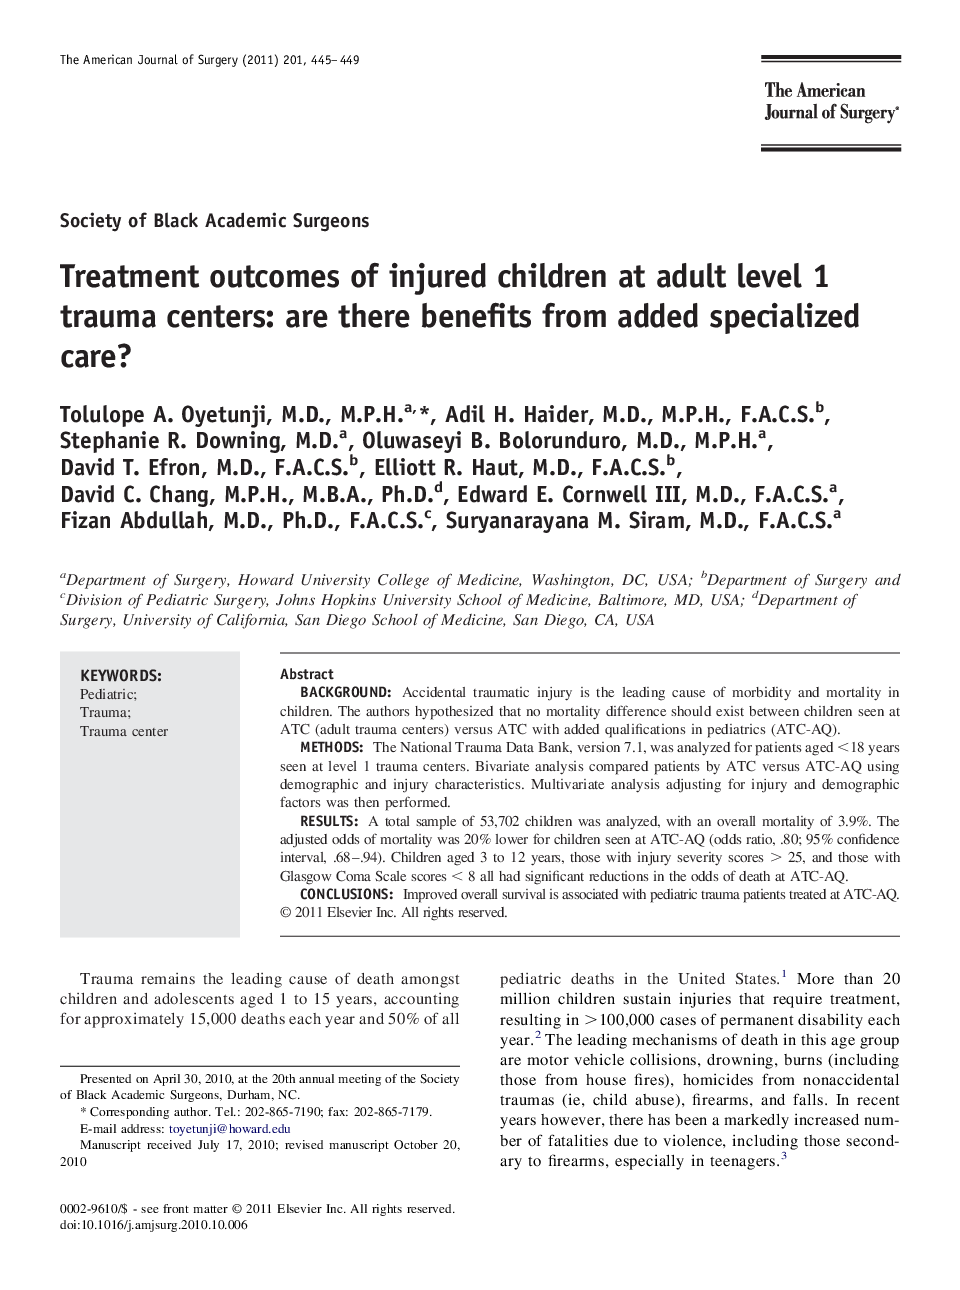 Treatment outcomes of injured children at adult level 1 trauma centers: are there benefits from added specialized care?